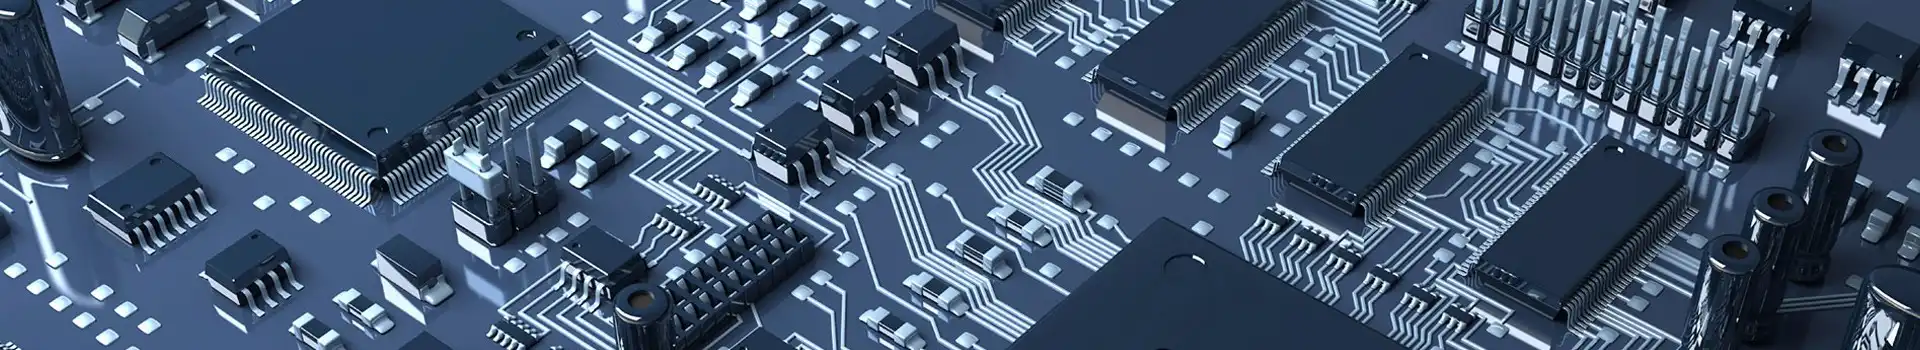 What material is the circuit board made of?